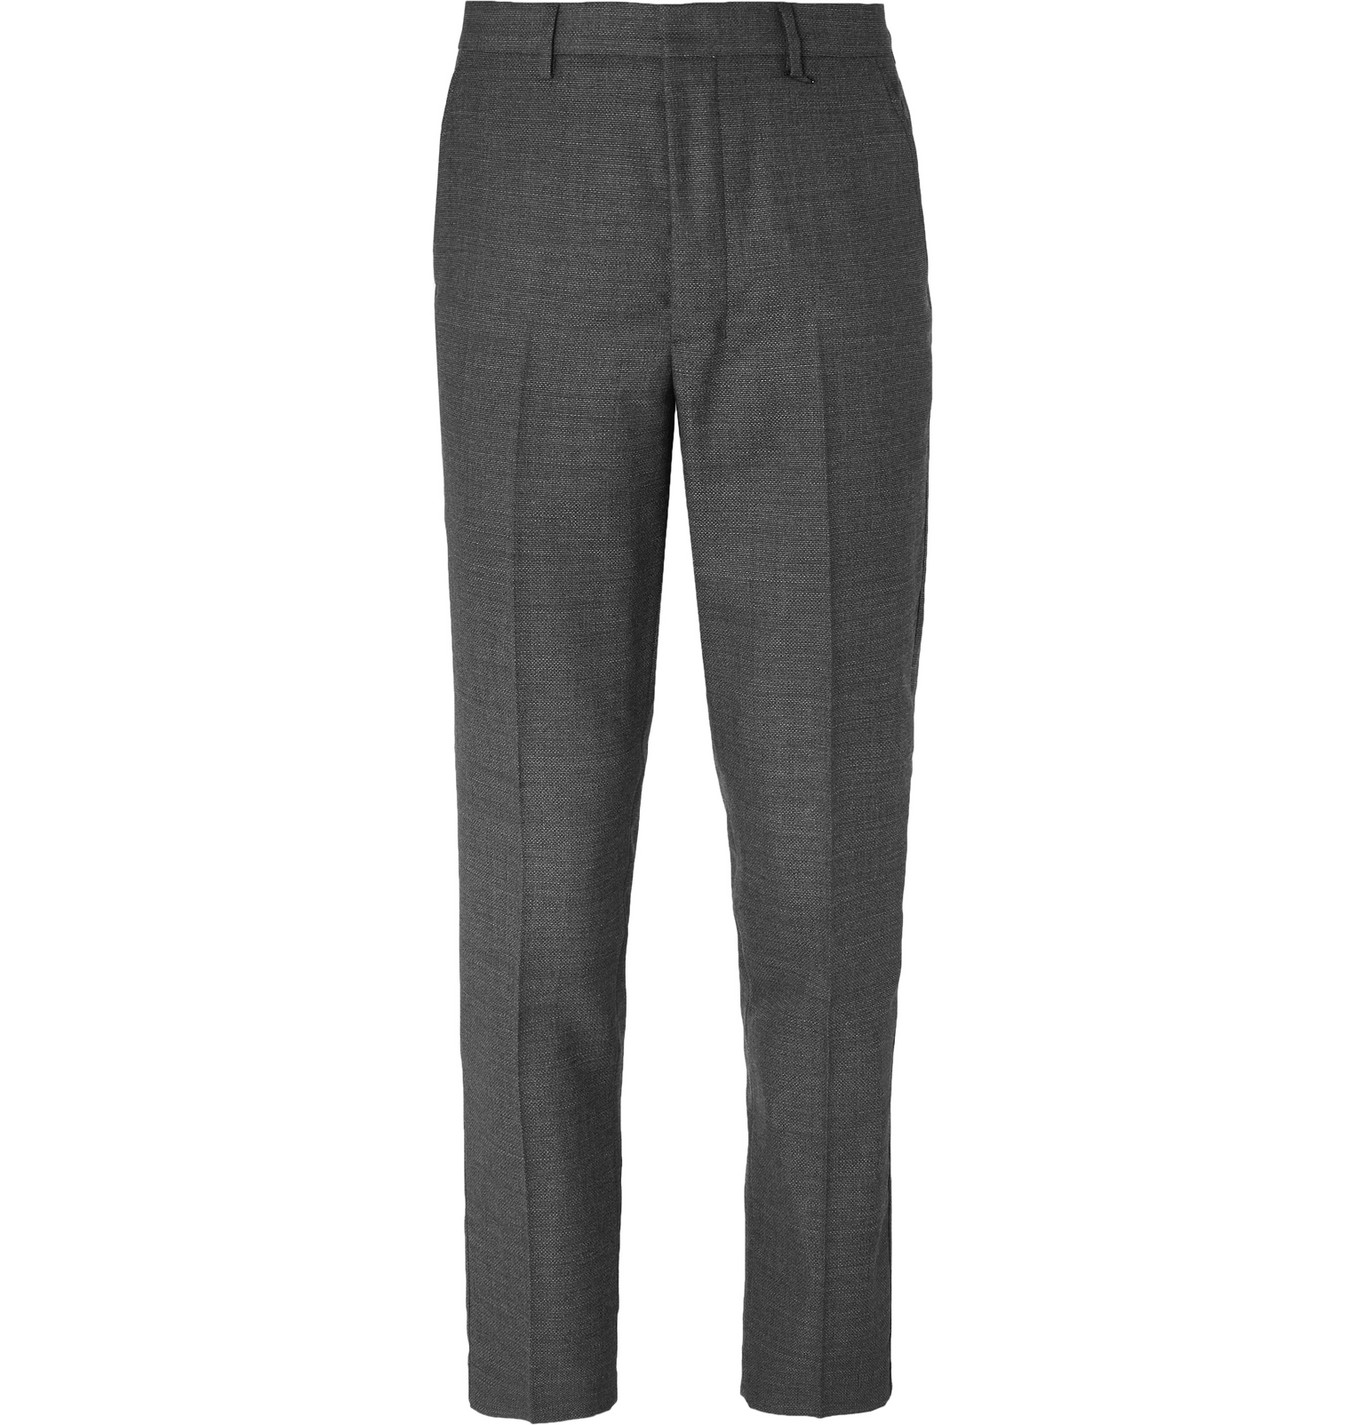 AMI - Grey Slim-Fit Wool Suit Trousers - Men - Gray | The Fashionisto